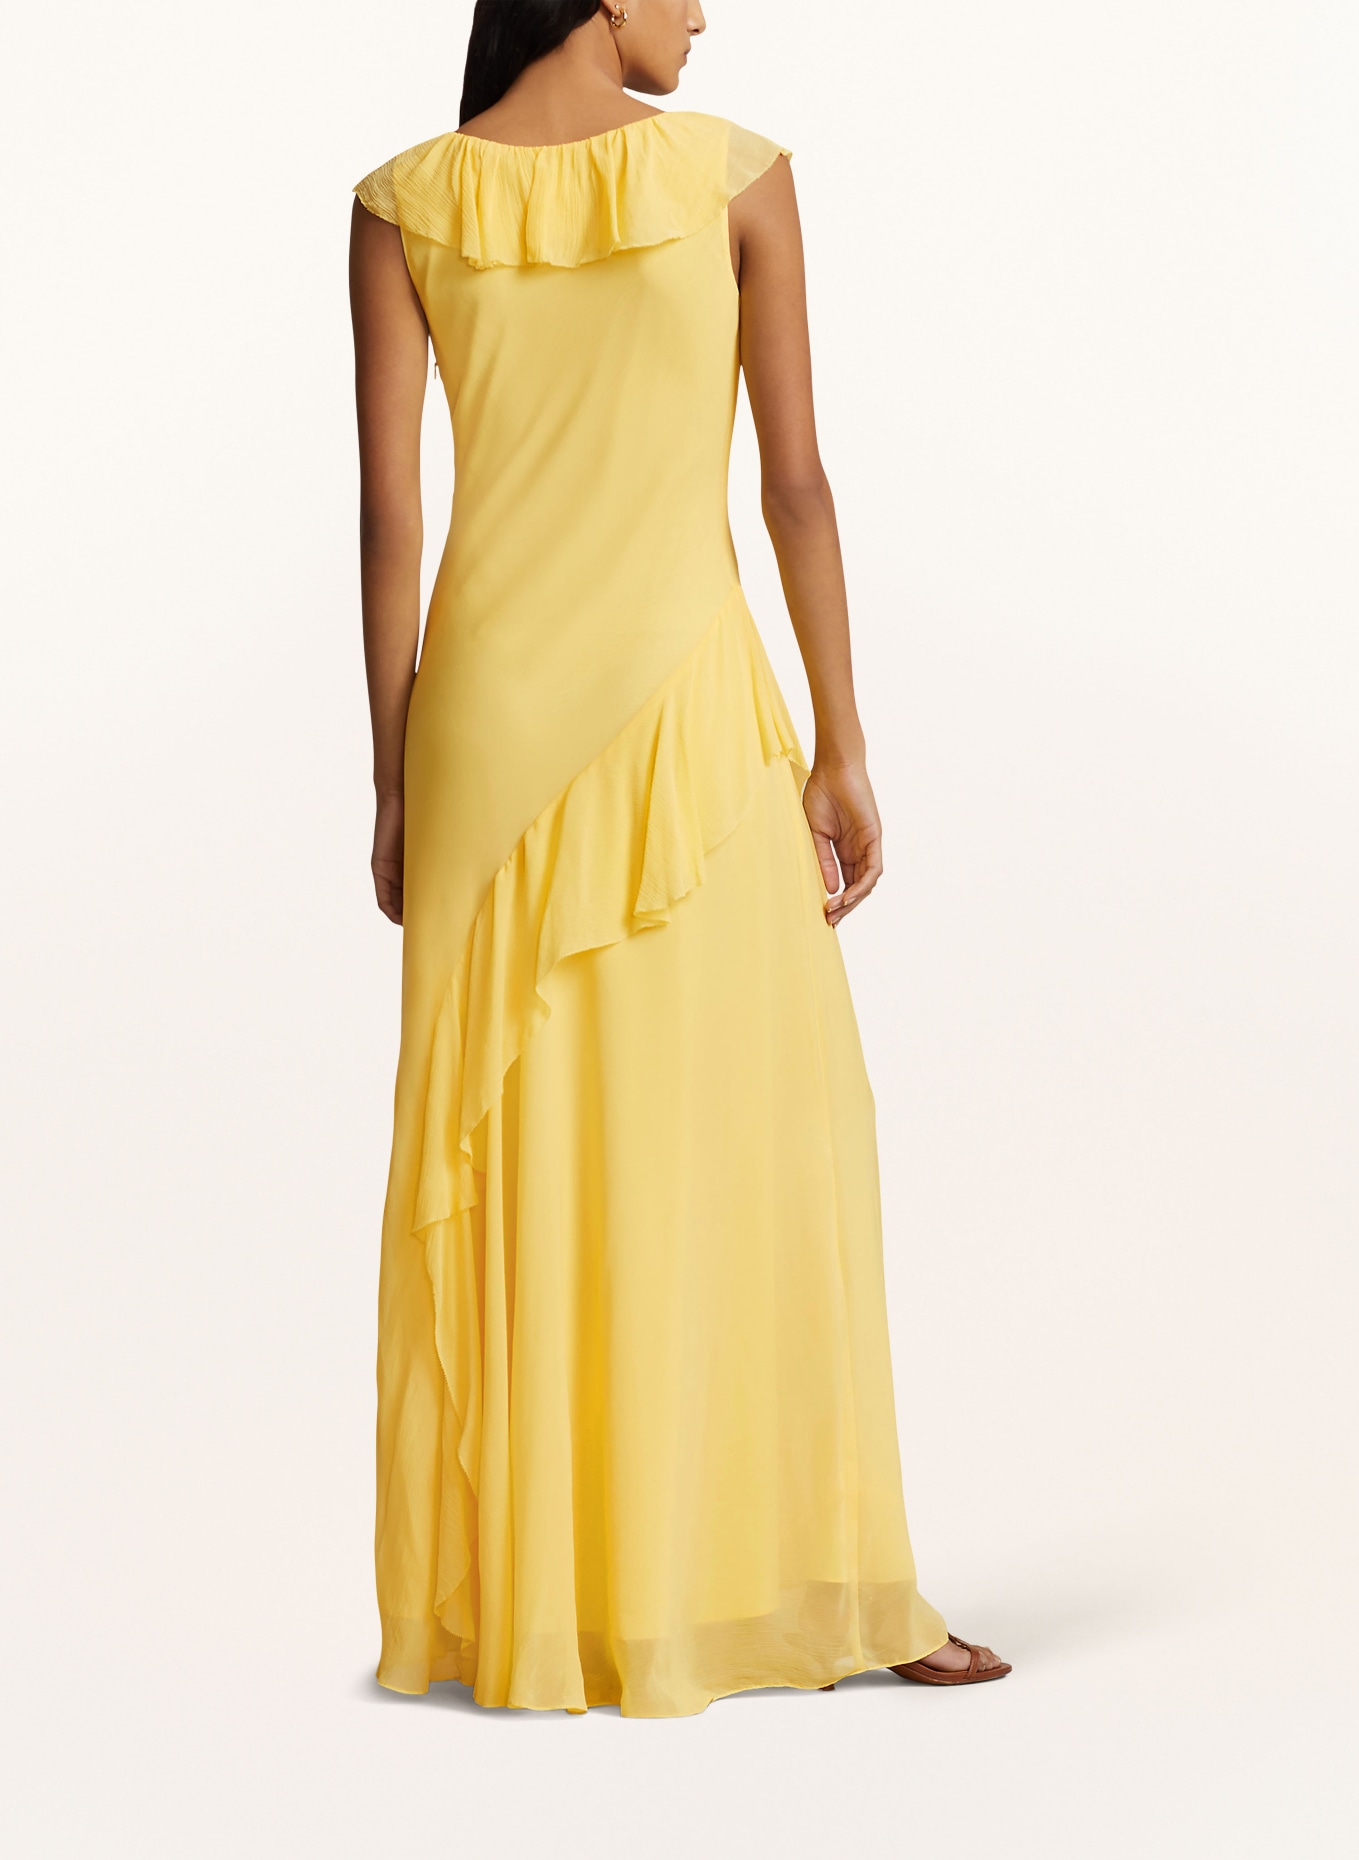 POLO RALPH LAUREN Dress with frills, Color: YELLOW (Image 3)